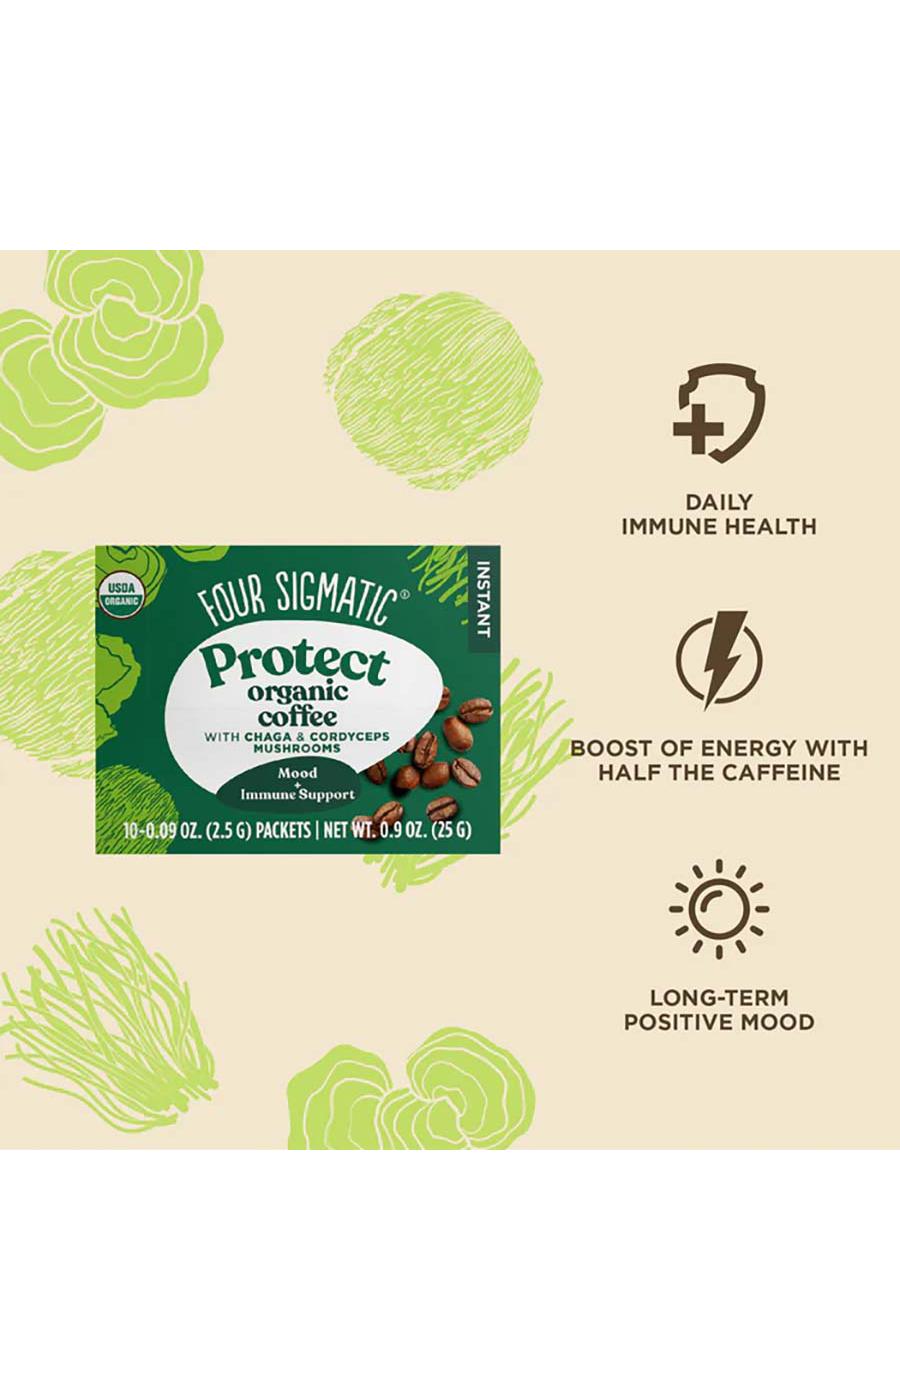 Four Sigmatic Protect Organic Coffee Mix Packets; image 3 of 4